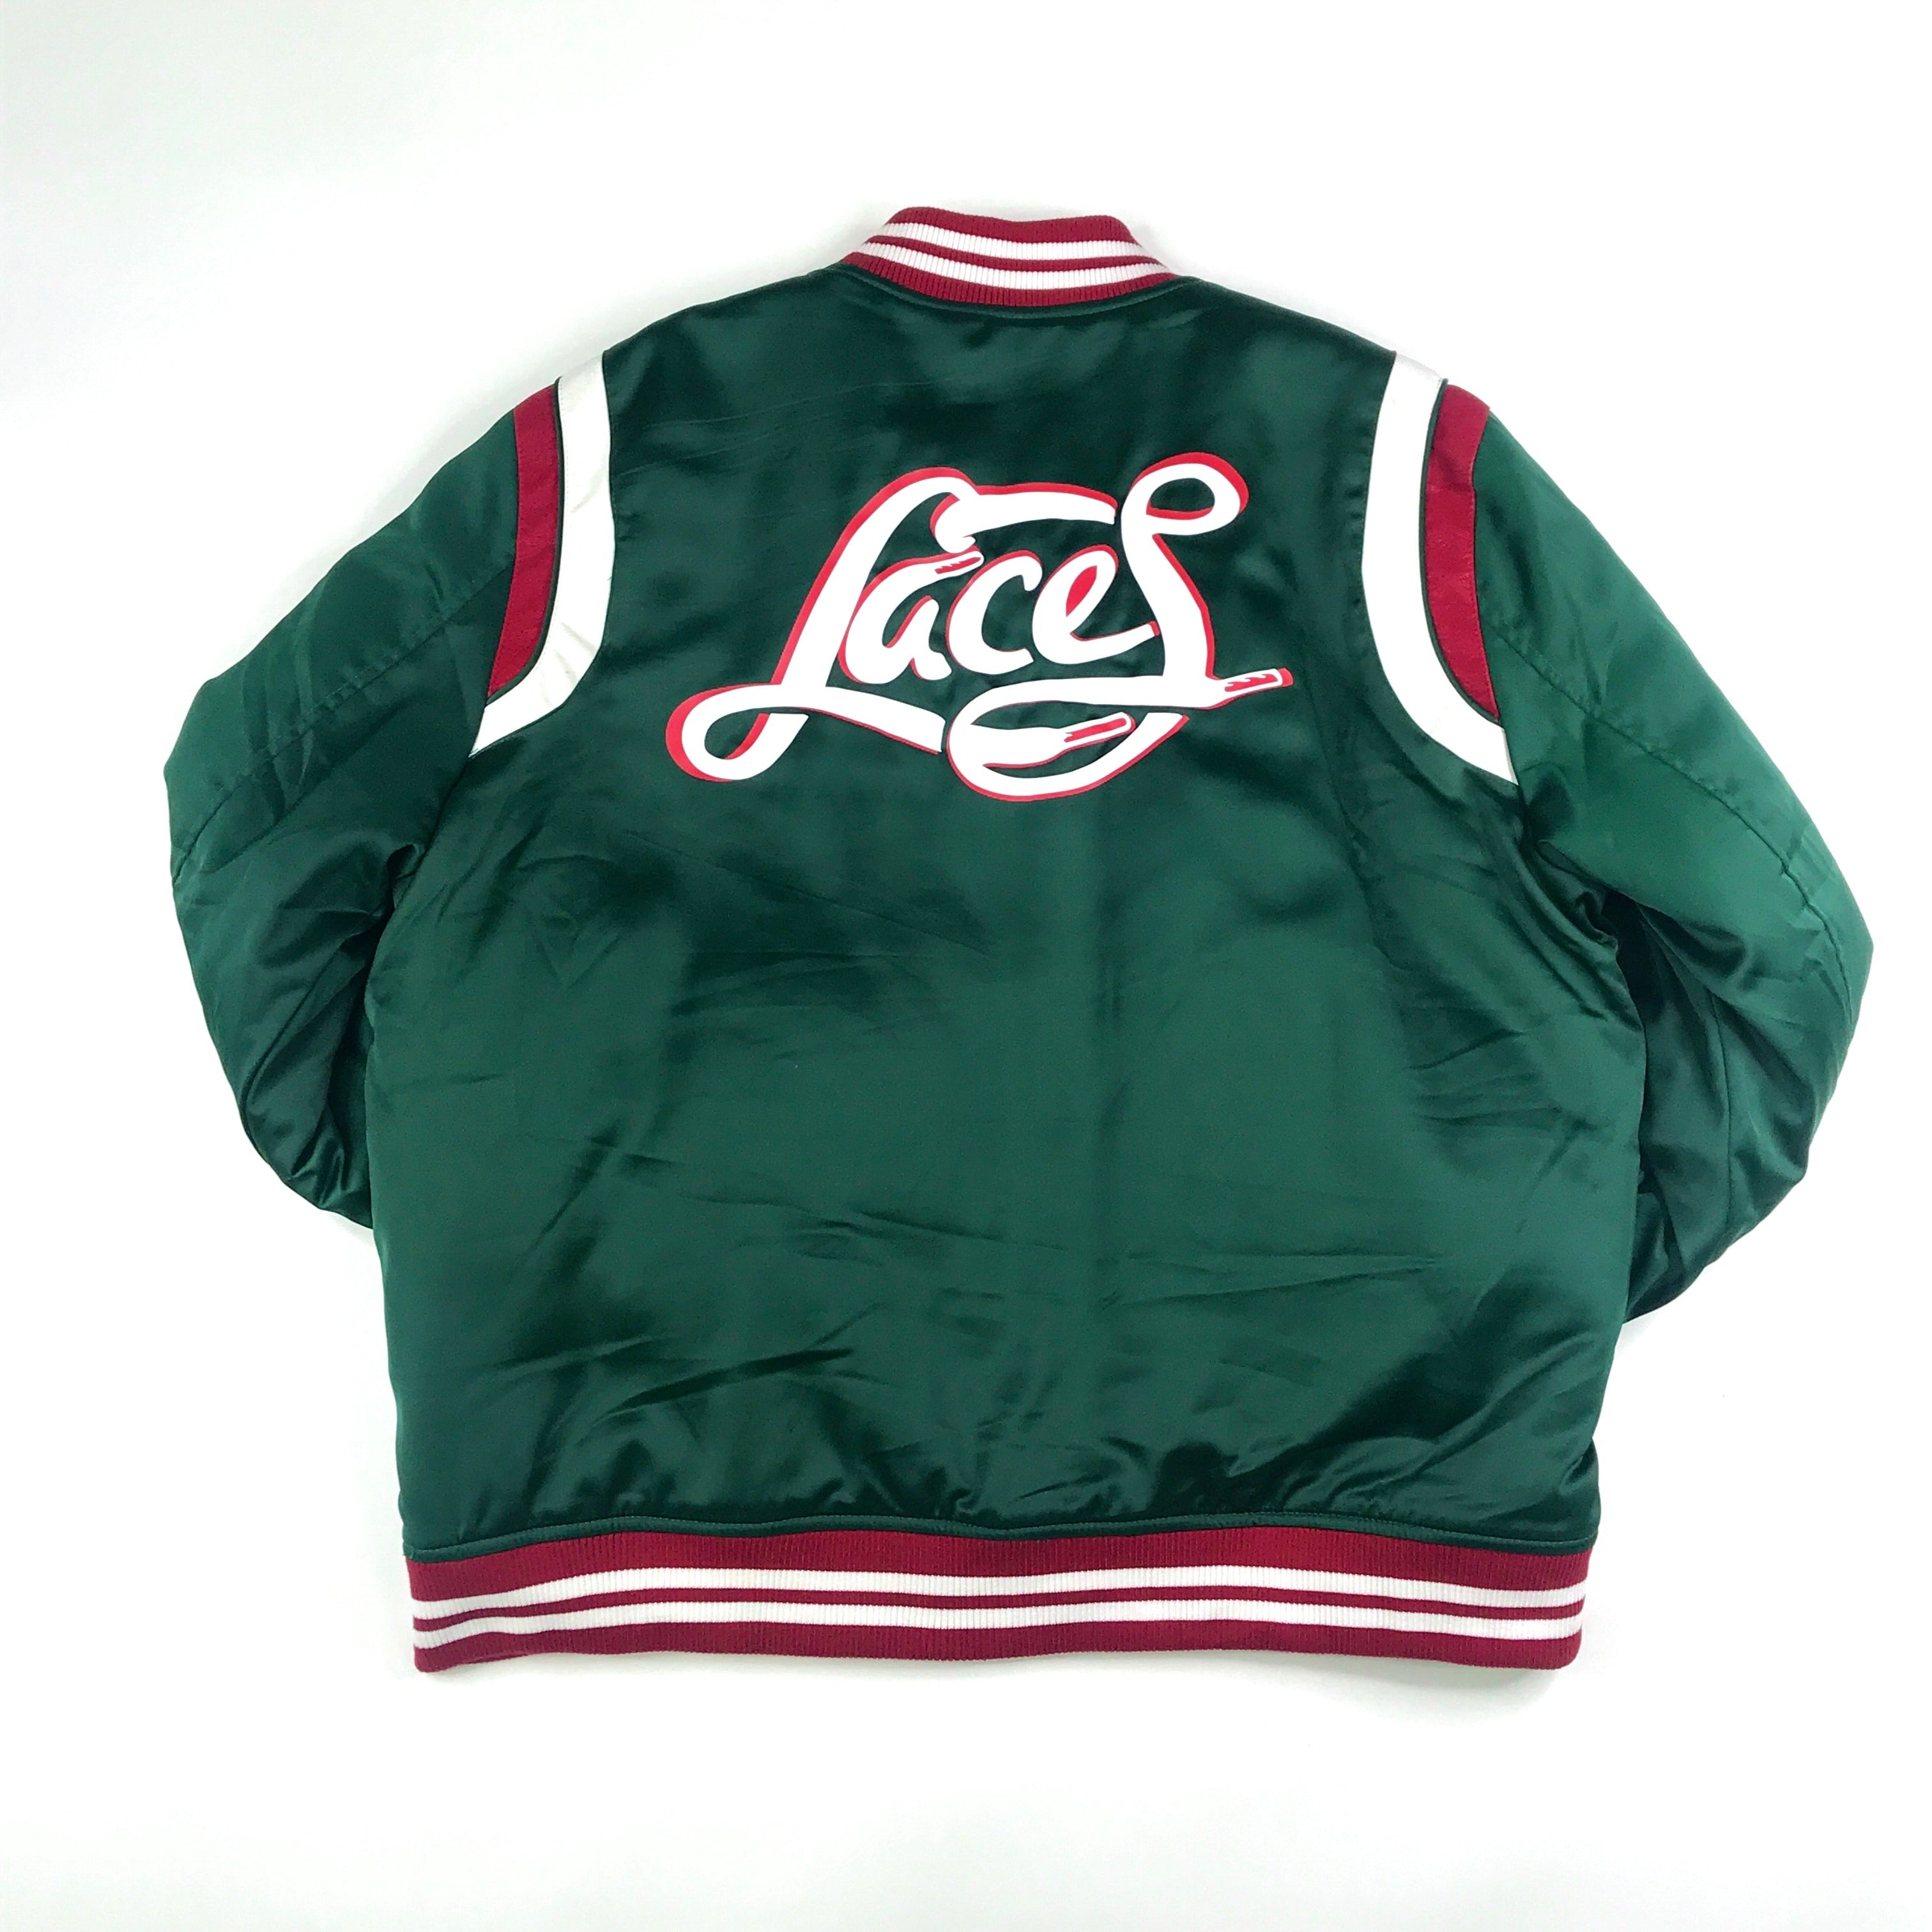 Laces green, red, white bomber